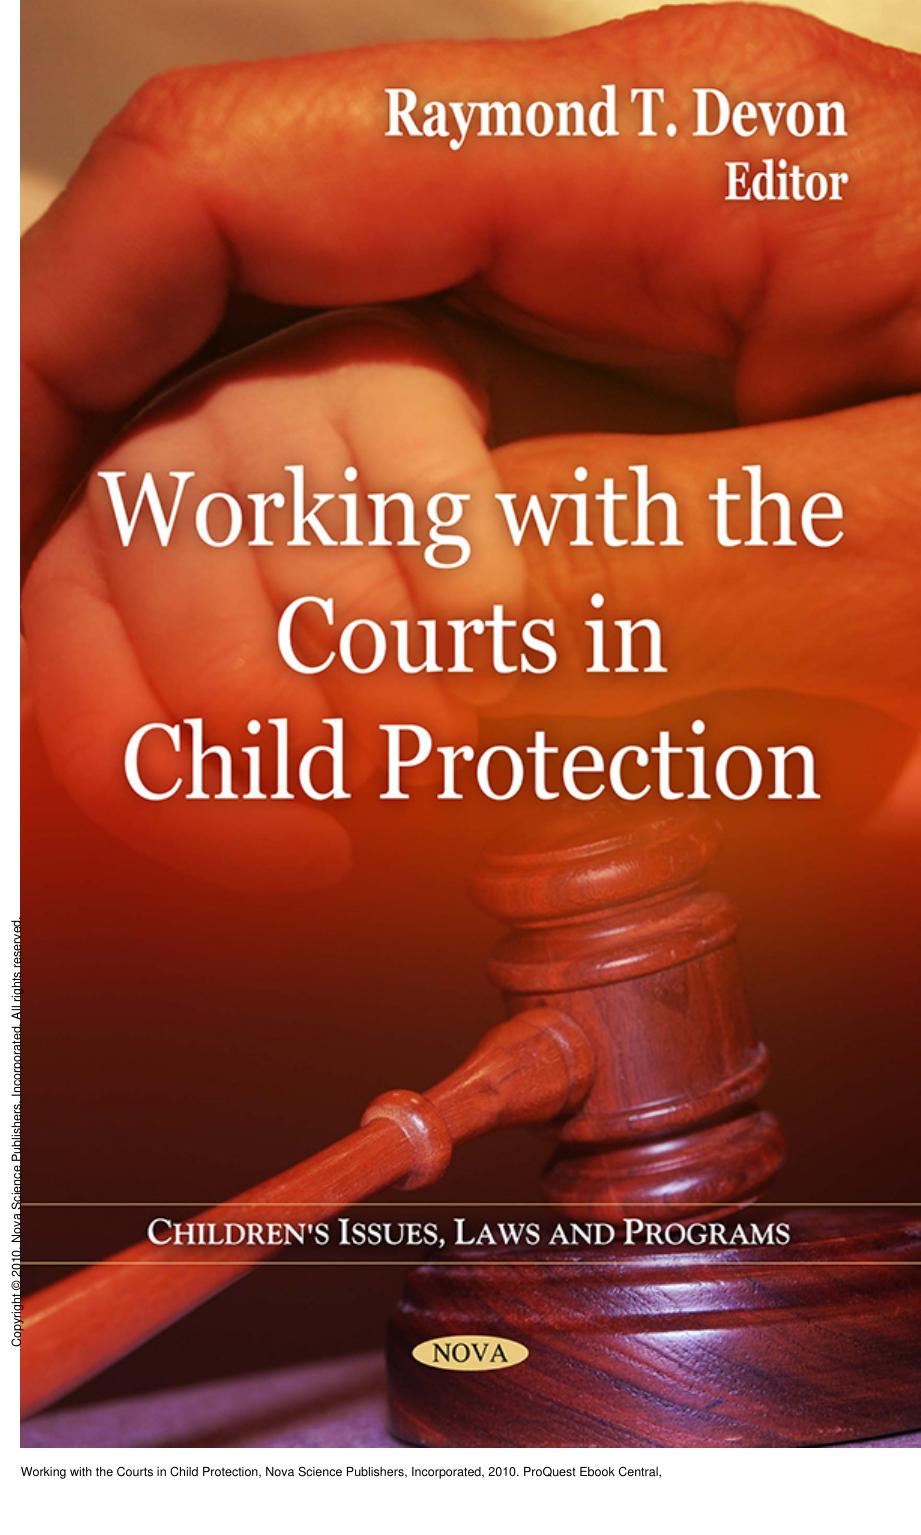 Working with the Courts in Child Protection by Raymond T. Devon